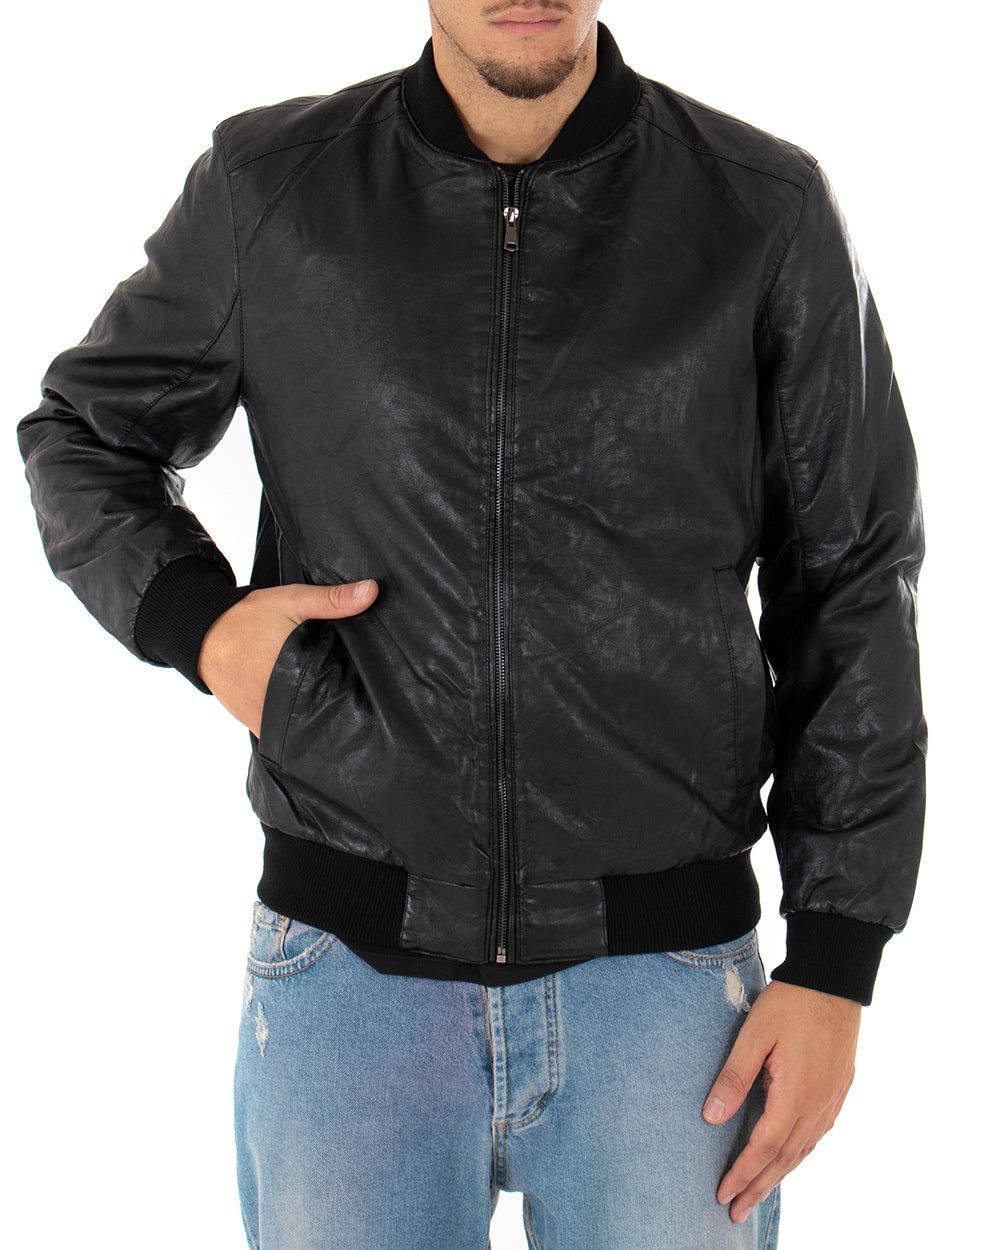 Men's Faux Leather Jacket Solid Color Black College Long Sleeve GIOSAL